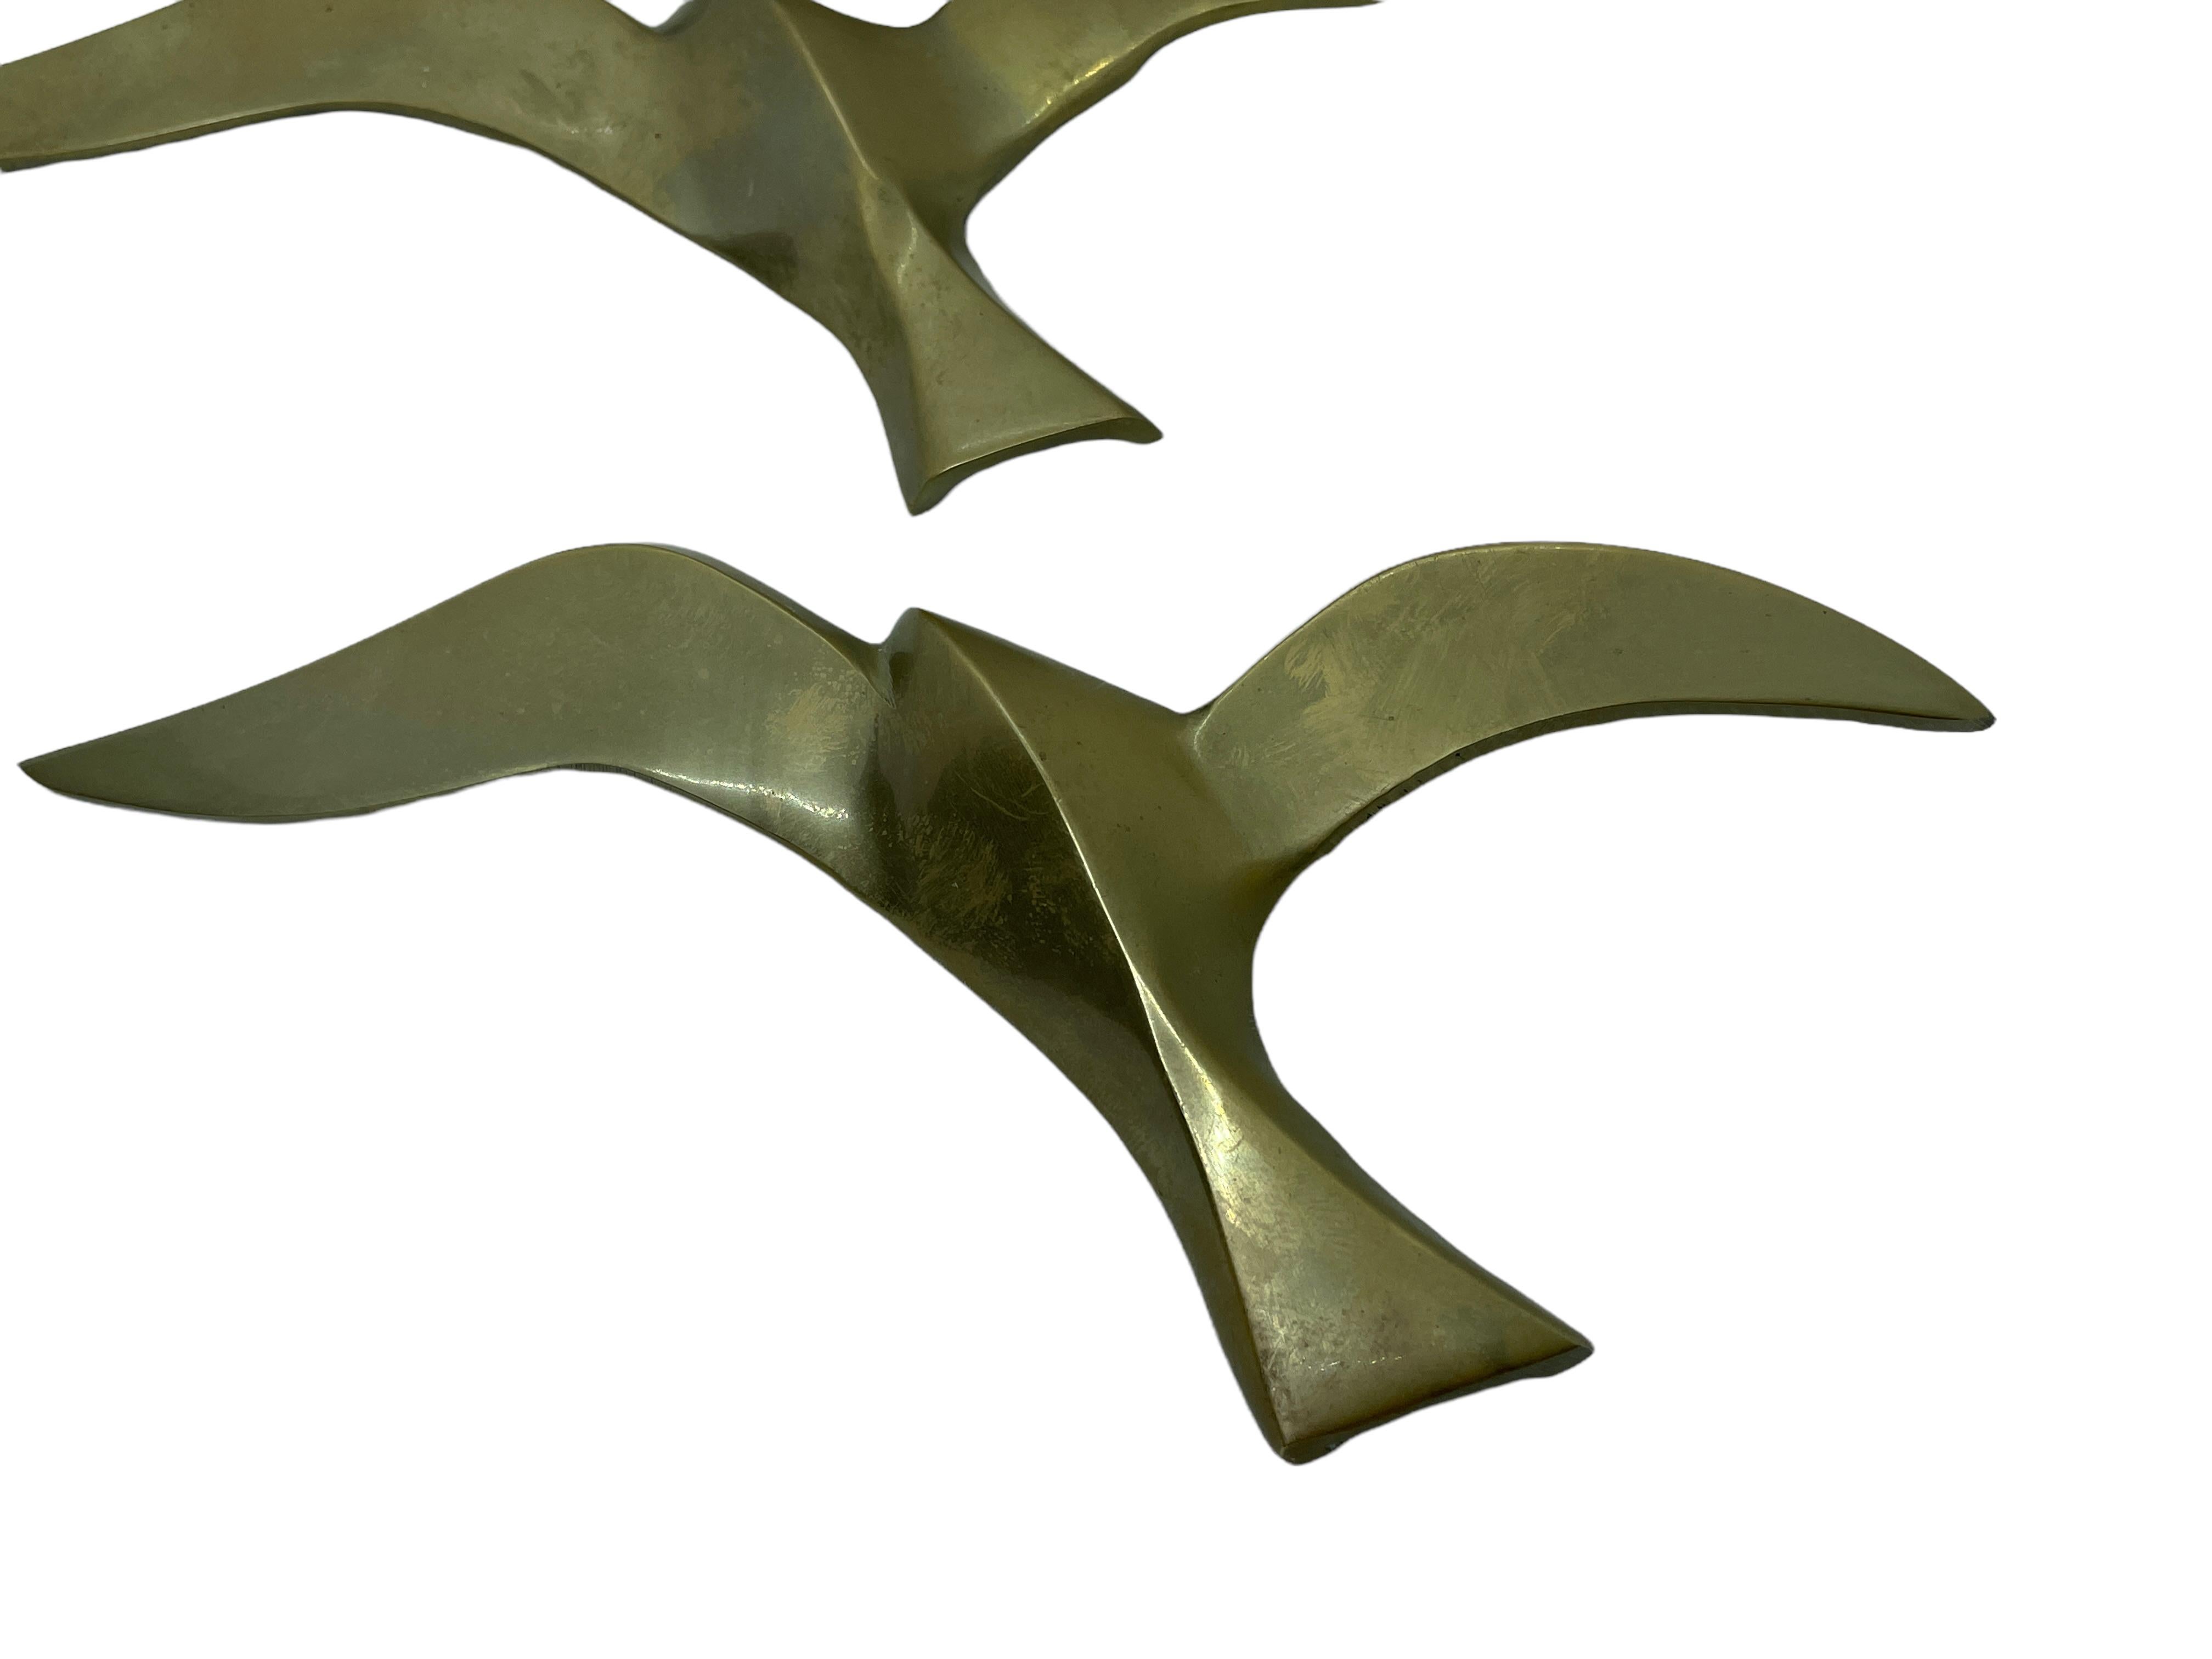 A set of three beautiful vintage brass flying swallow wall decorations. Each would make a beautiful ornament on a wall. They are with some patina and are an excellent craftsmanship. Made in the 1960s it displays the joy of that great era with a